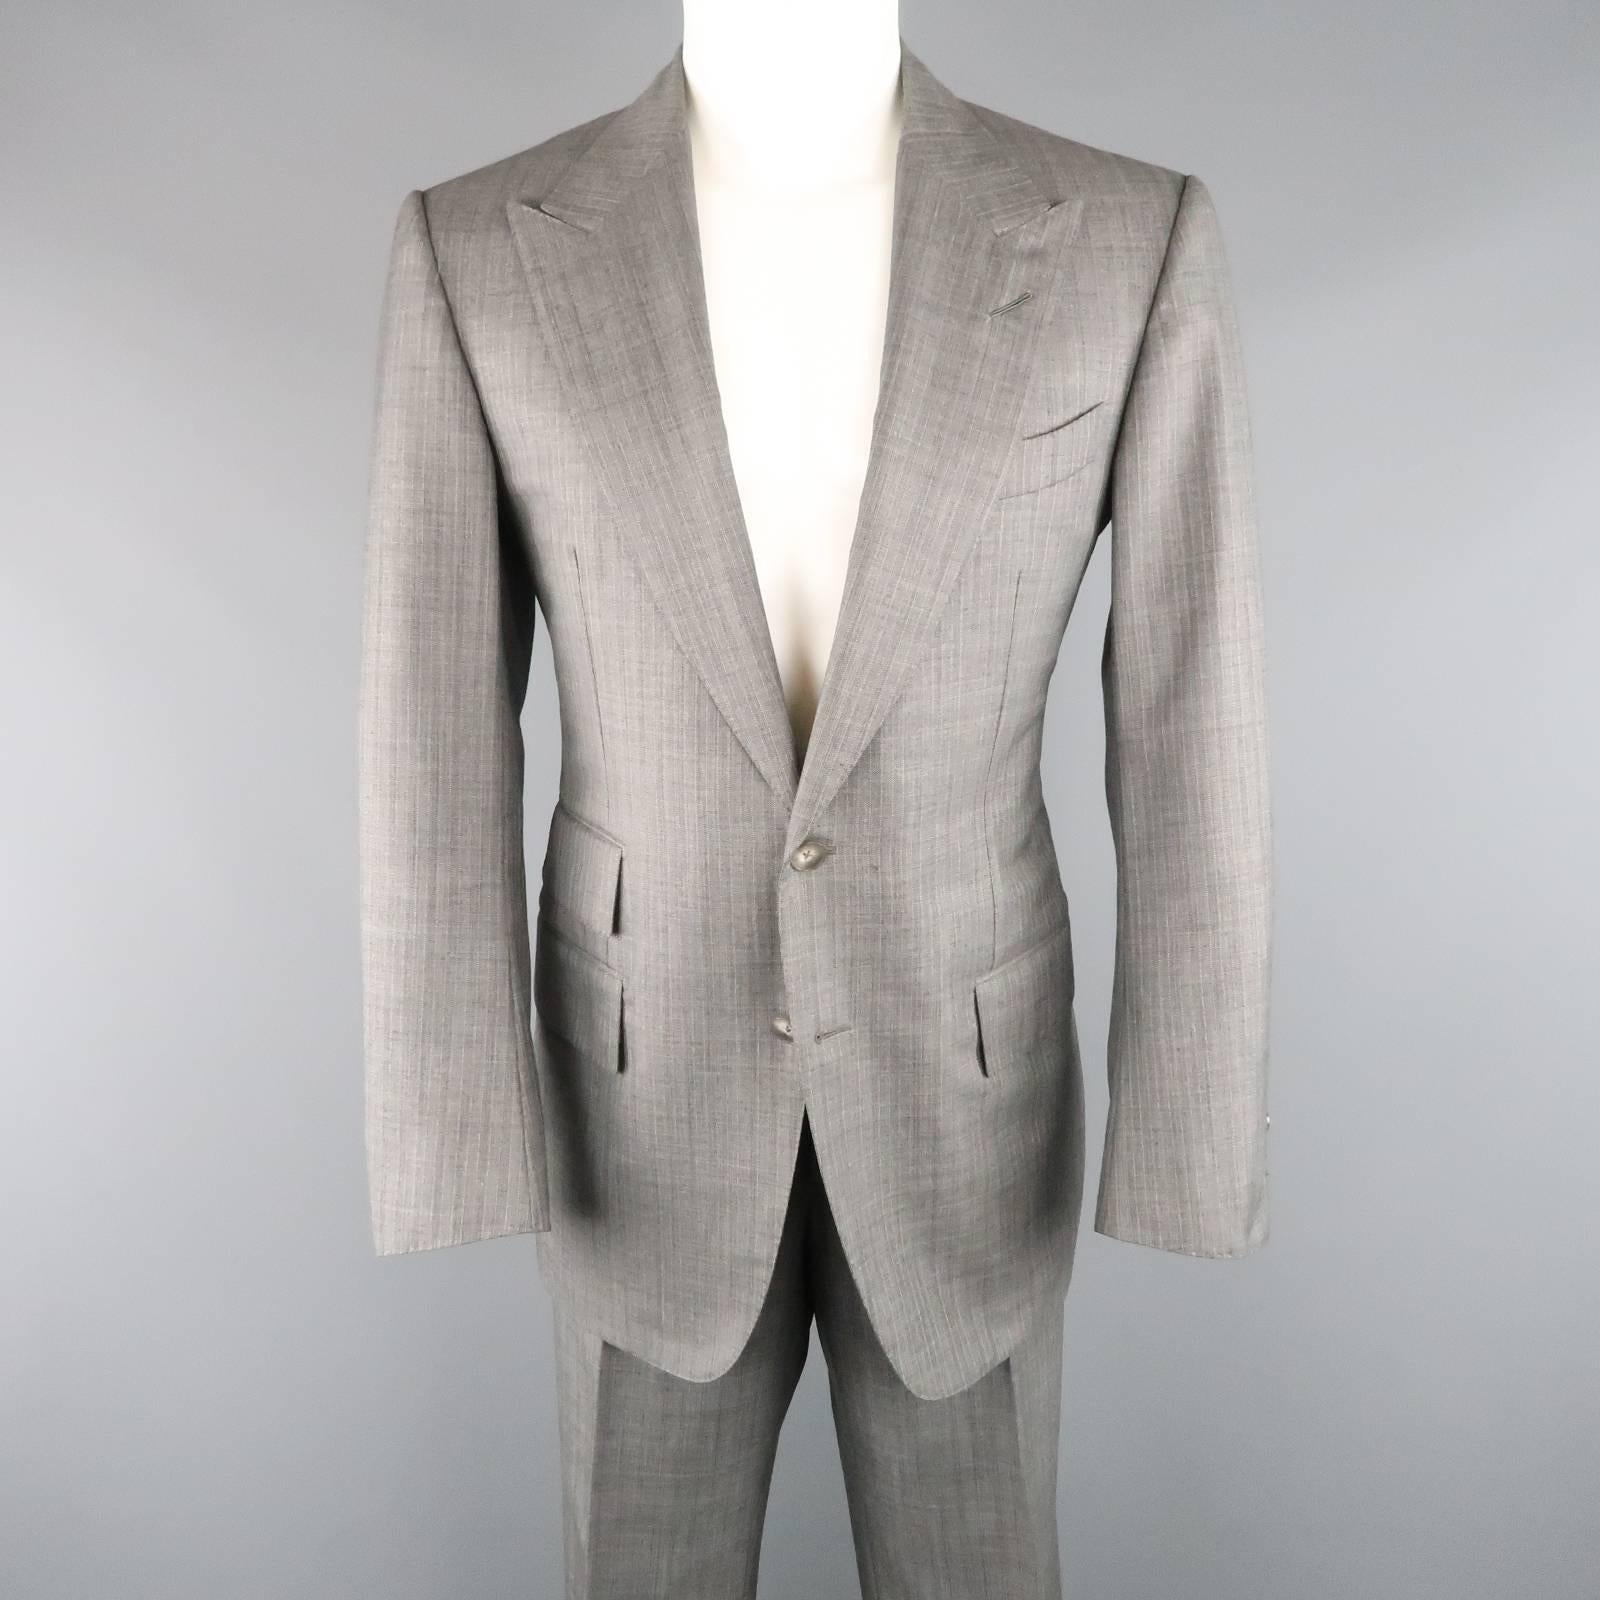 Classic TOM FORD suit comes in a silver gray herringbone stripe wool and includes a two button, single breasted, peak lapel sport coat and matching cuffed hem, straight leg trousers with side tabs. Made in Italy.
 
Excellent Pre-Owned